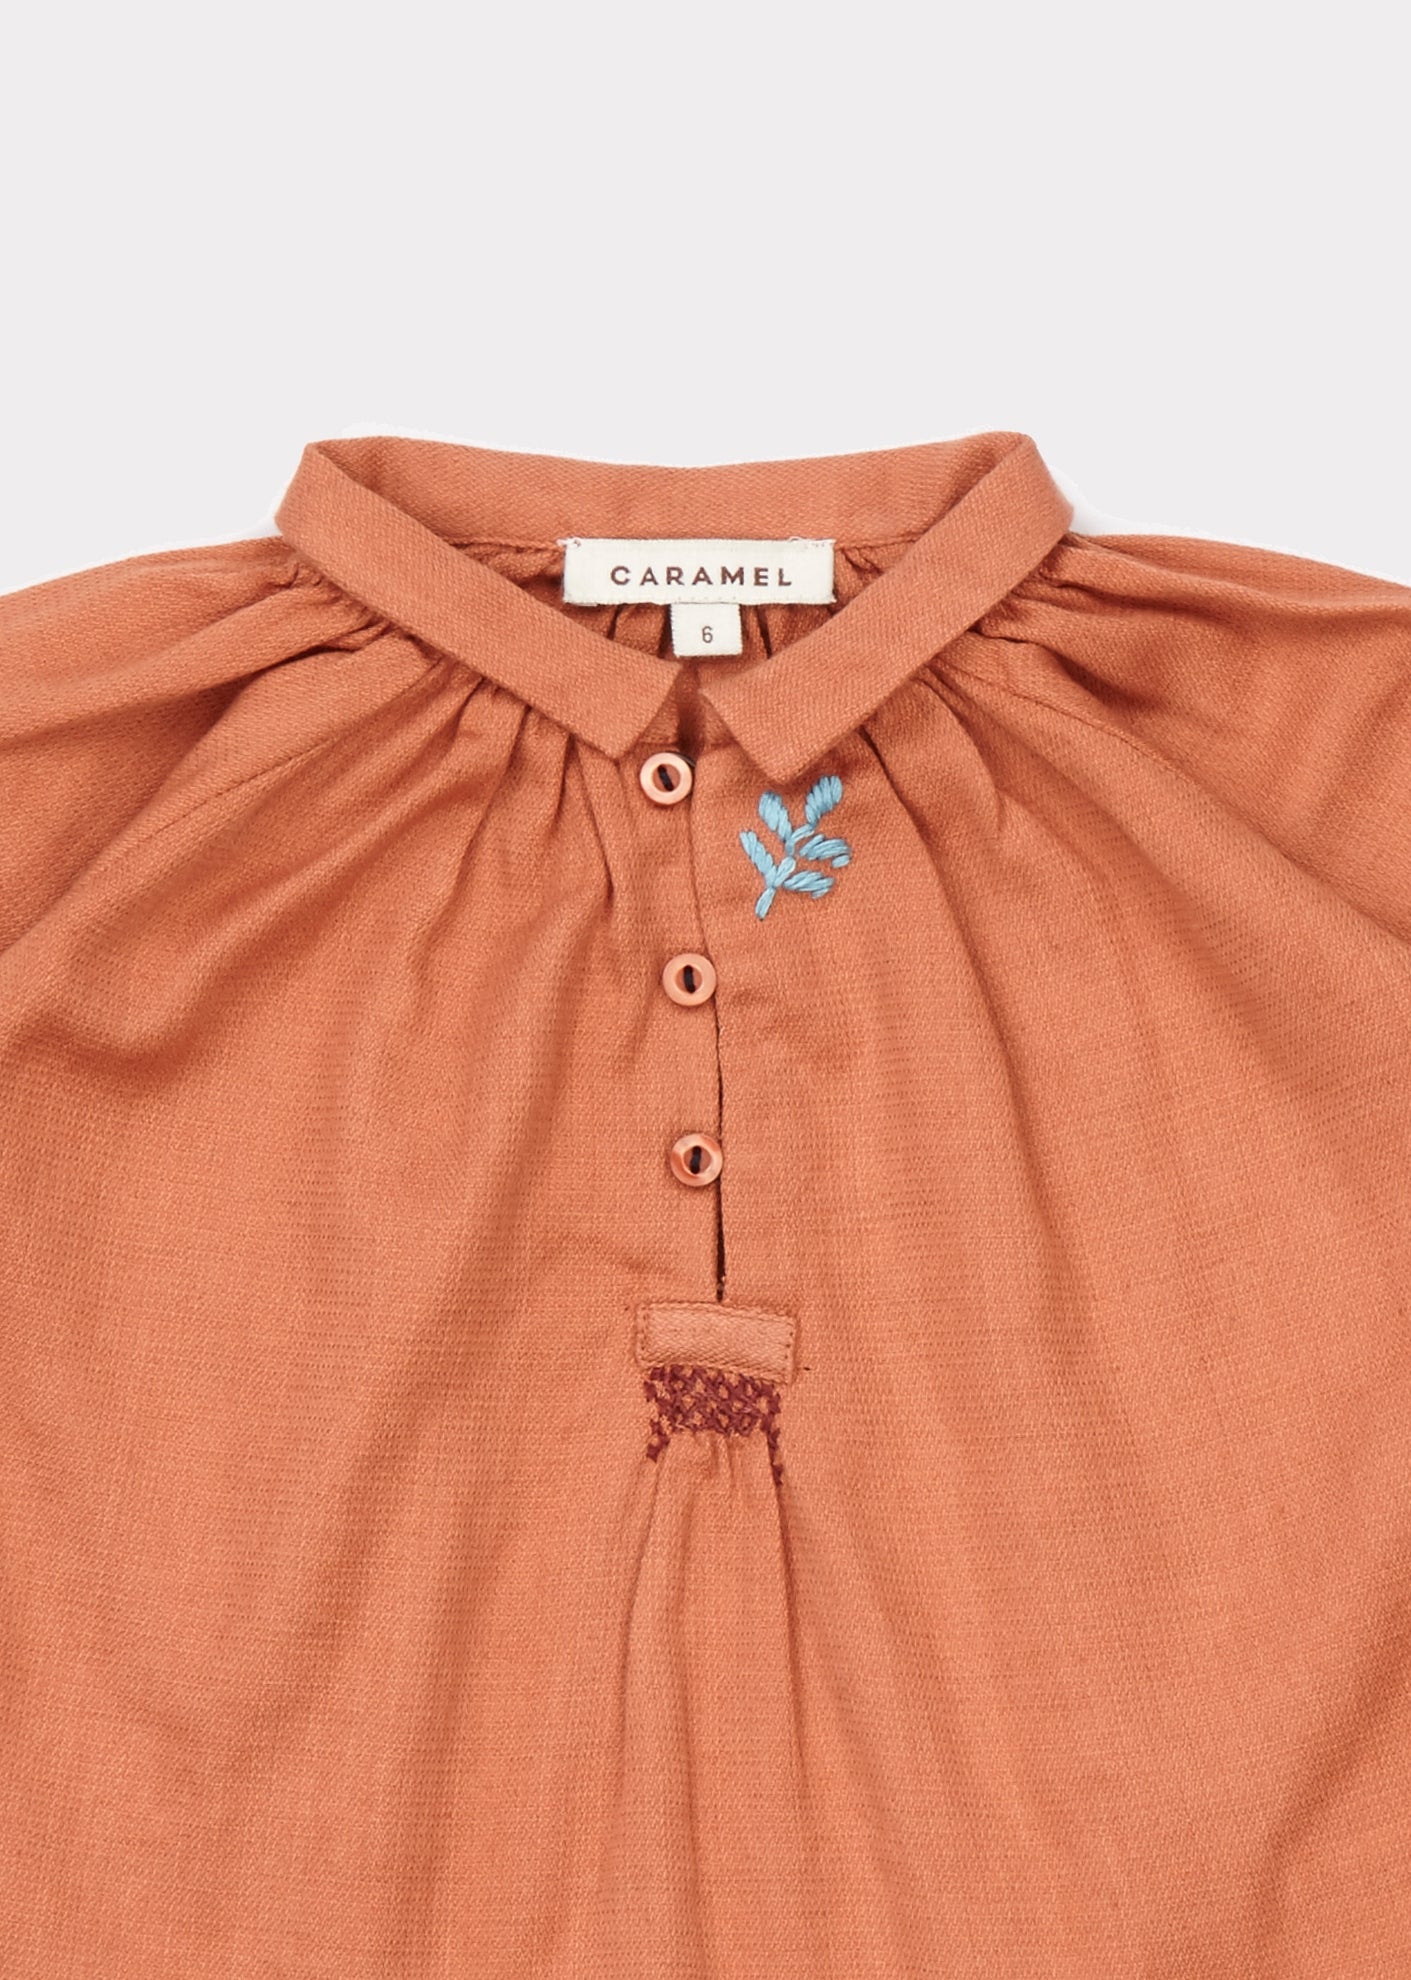 HADDON EMBROIDERY BABY BLOUSE - PERSIMMON